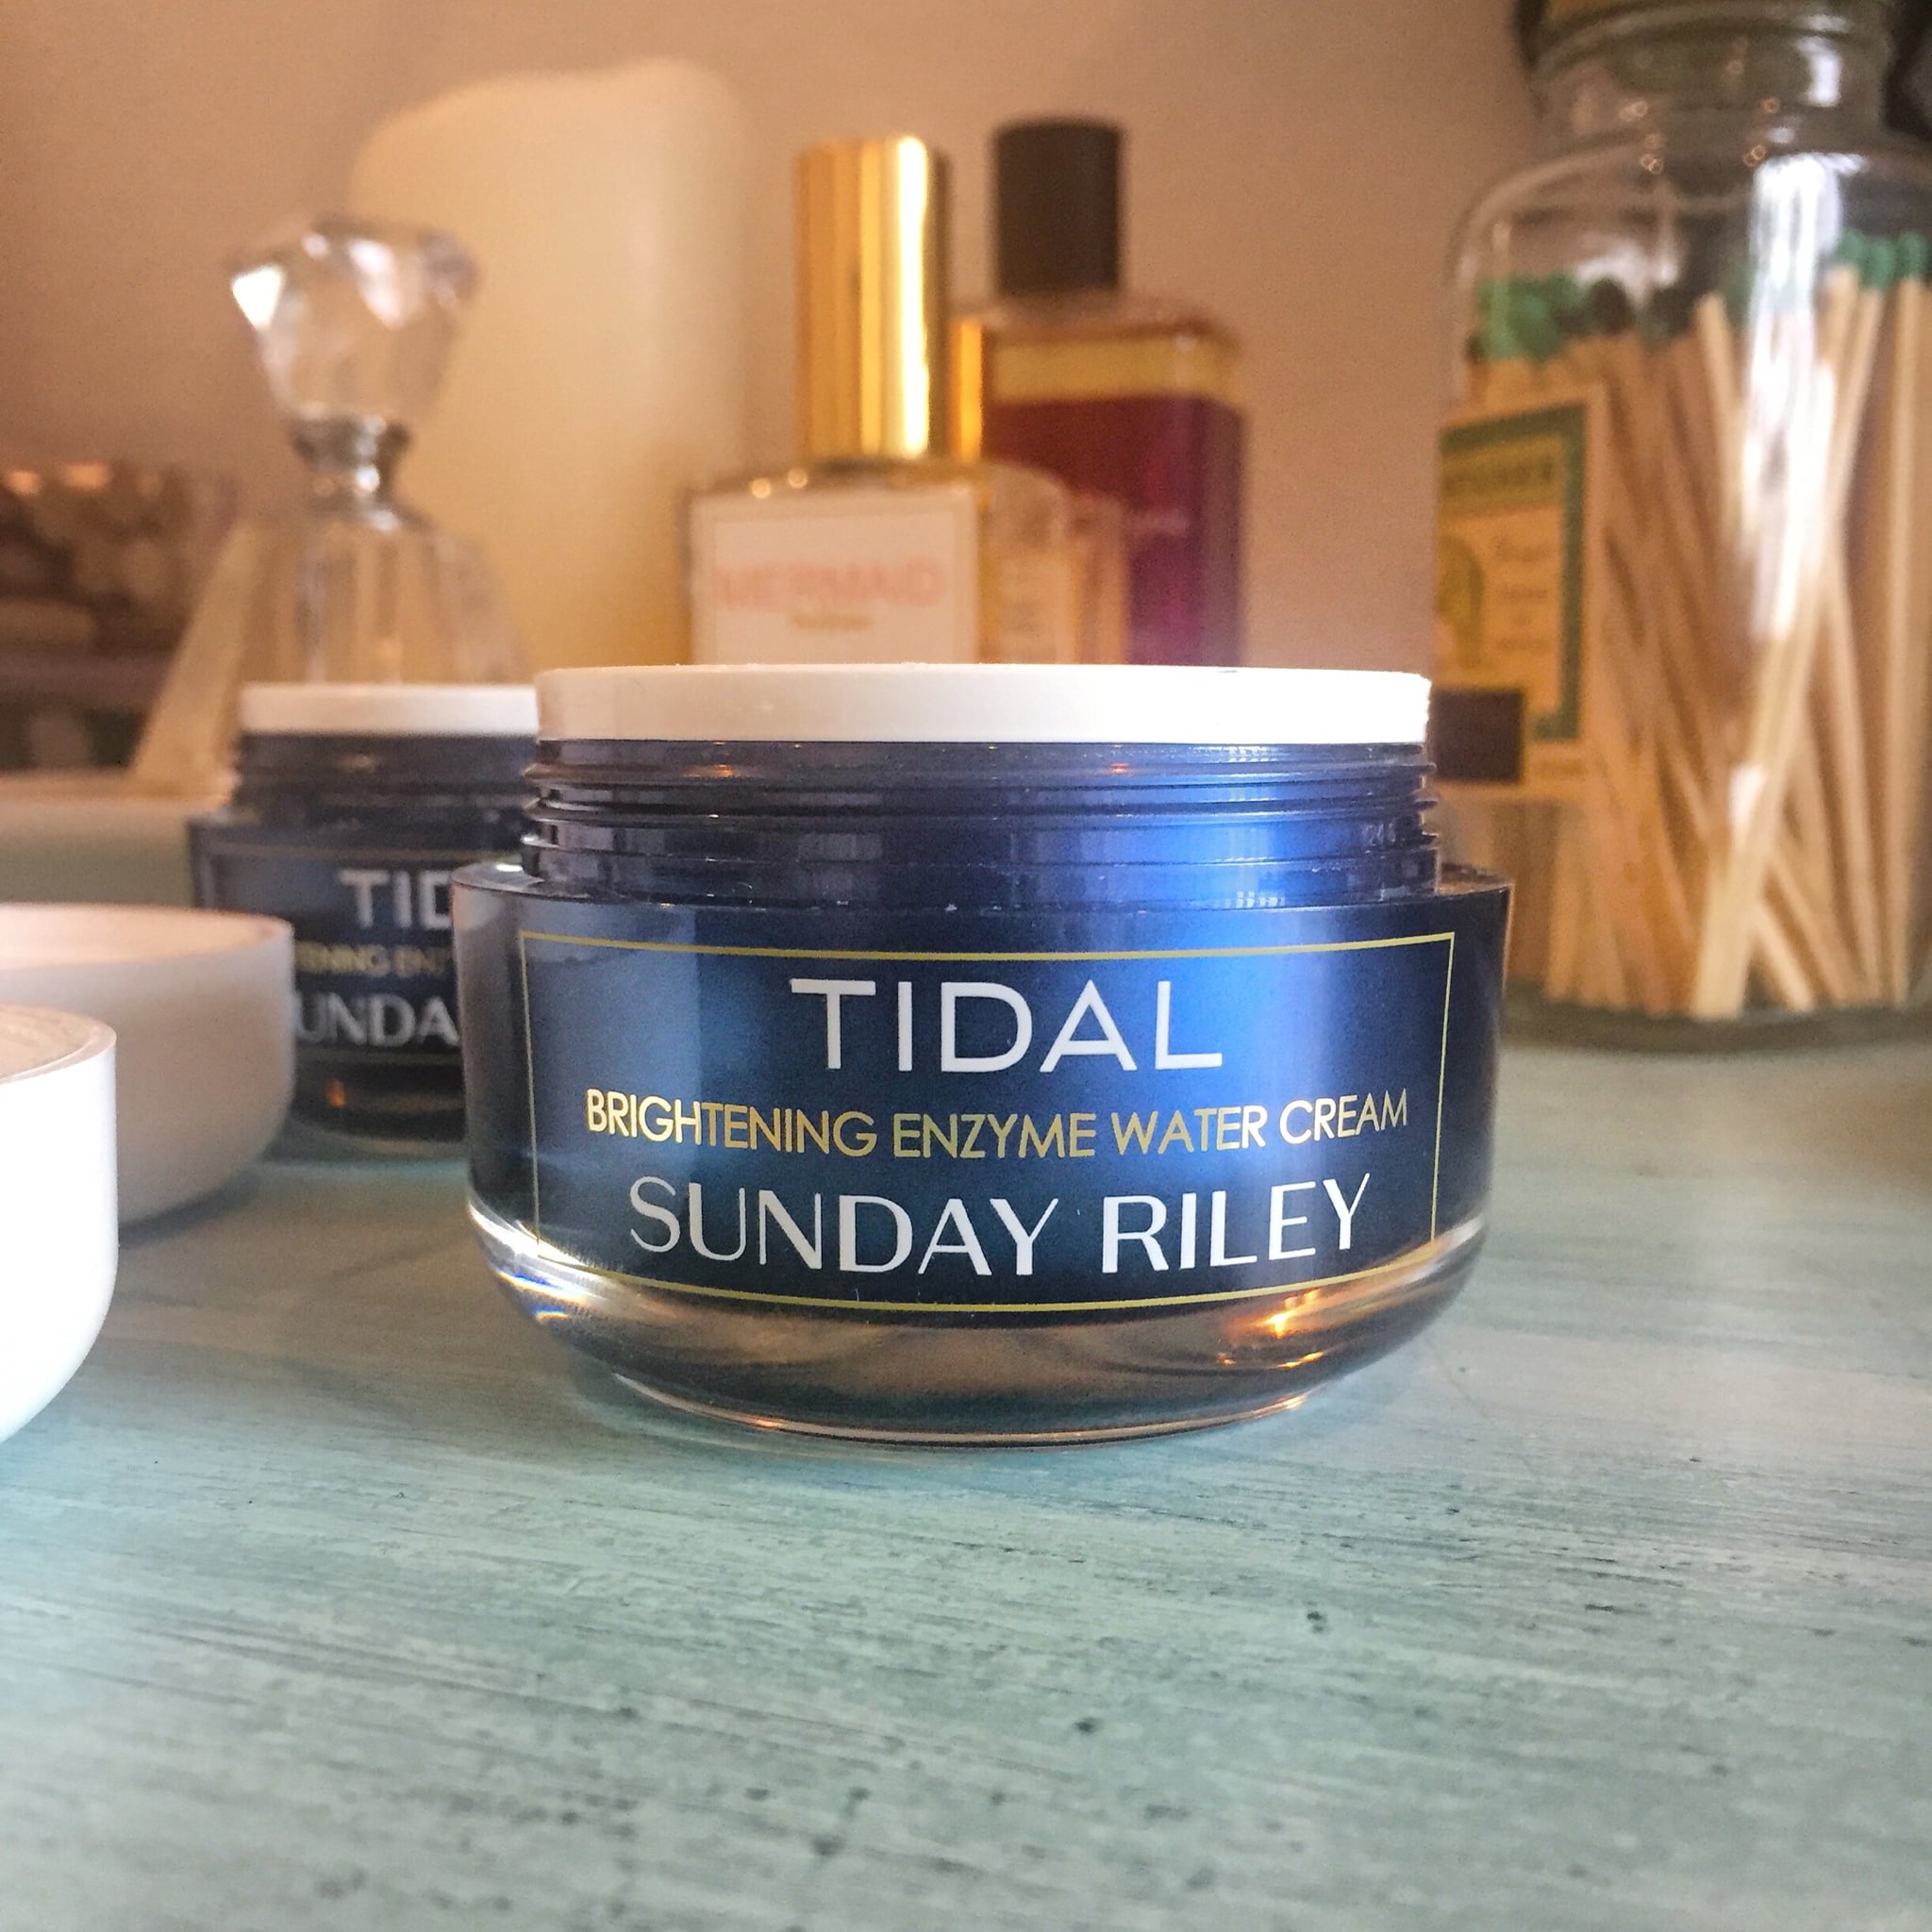 Sunday Riley Tidal Brightening Enzyme Water Cream Review POPSUGAR Beauty